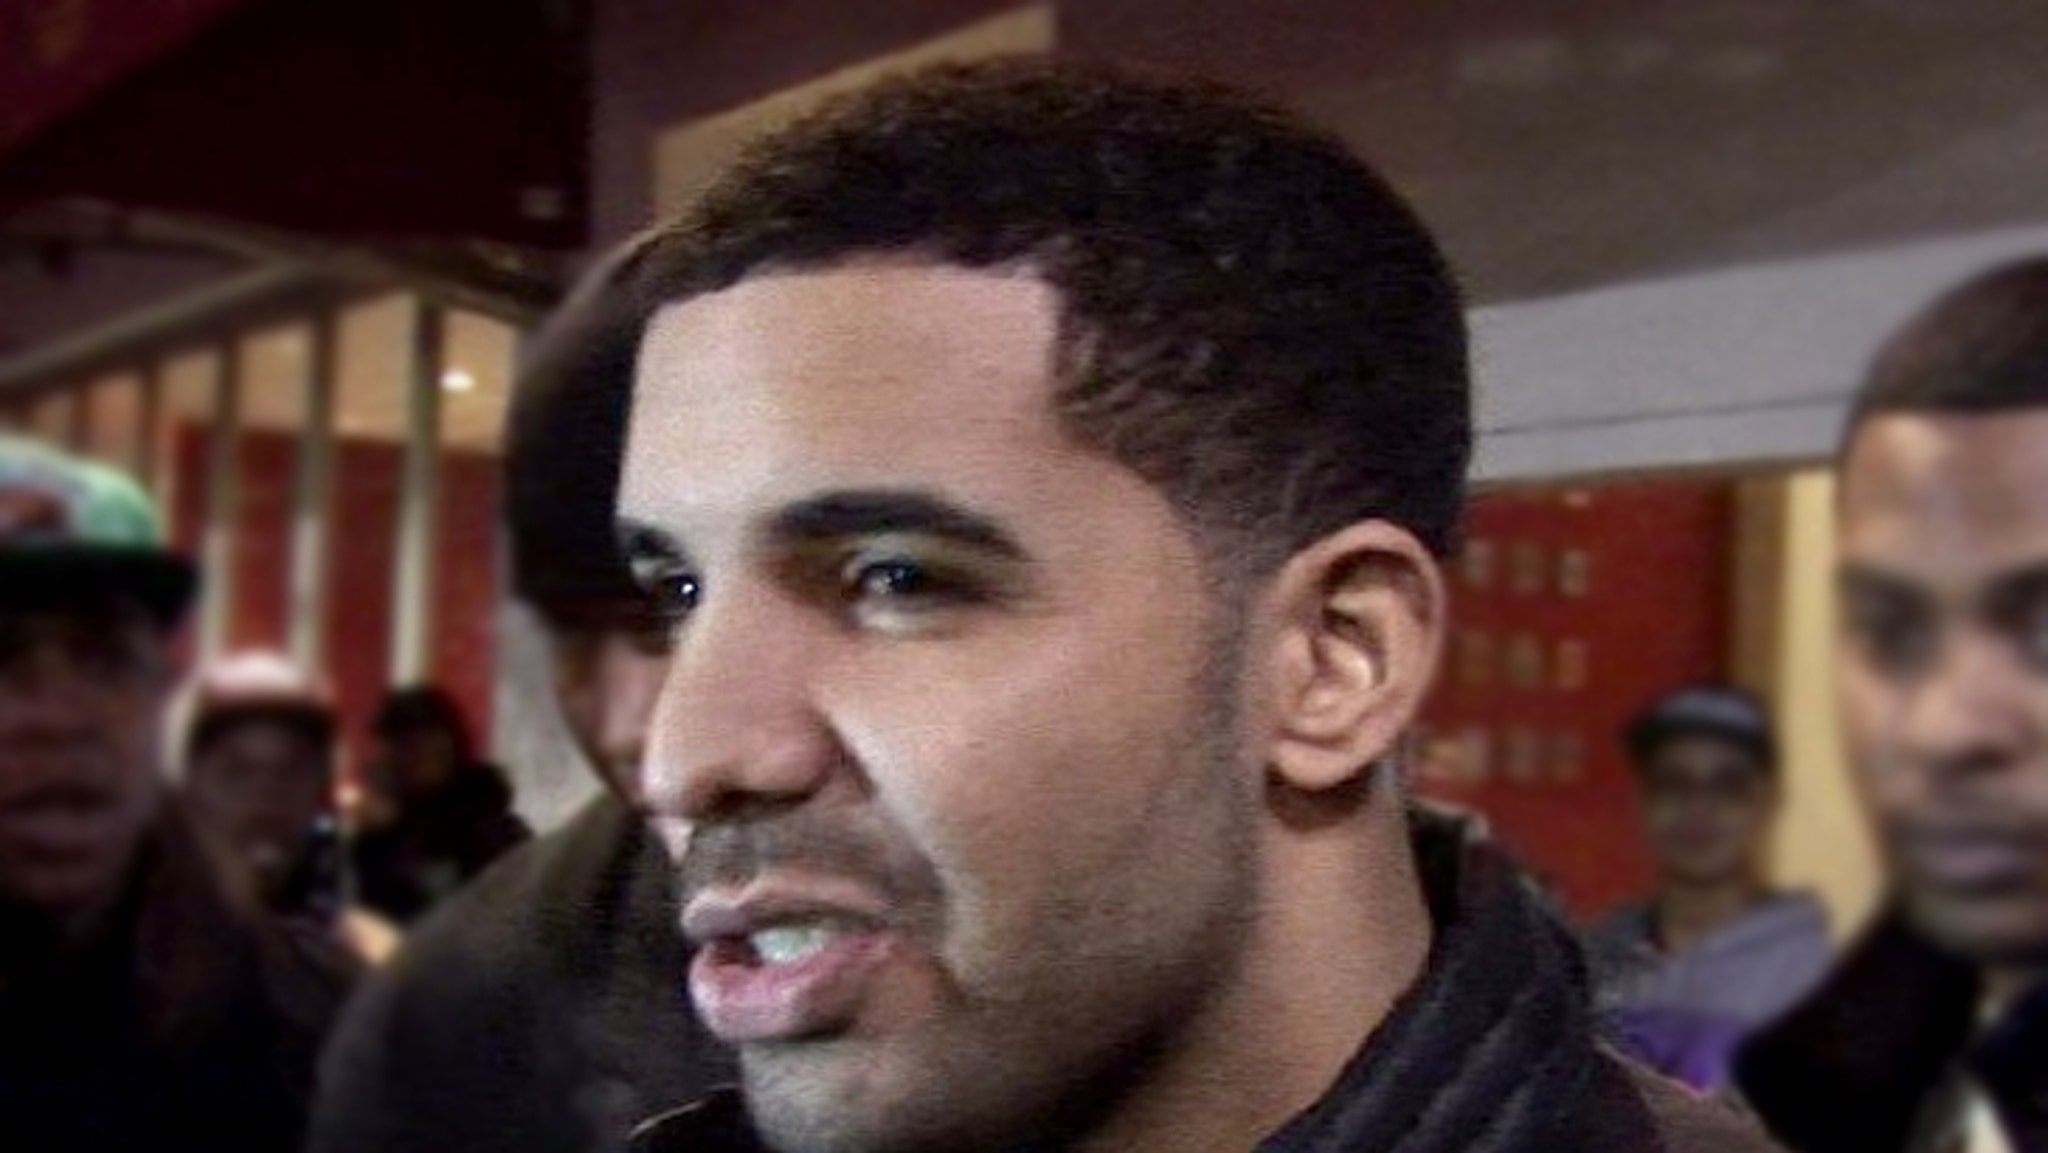 Drake Under Fire For 2010 Video Showing Him Touching And Kissing 17 